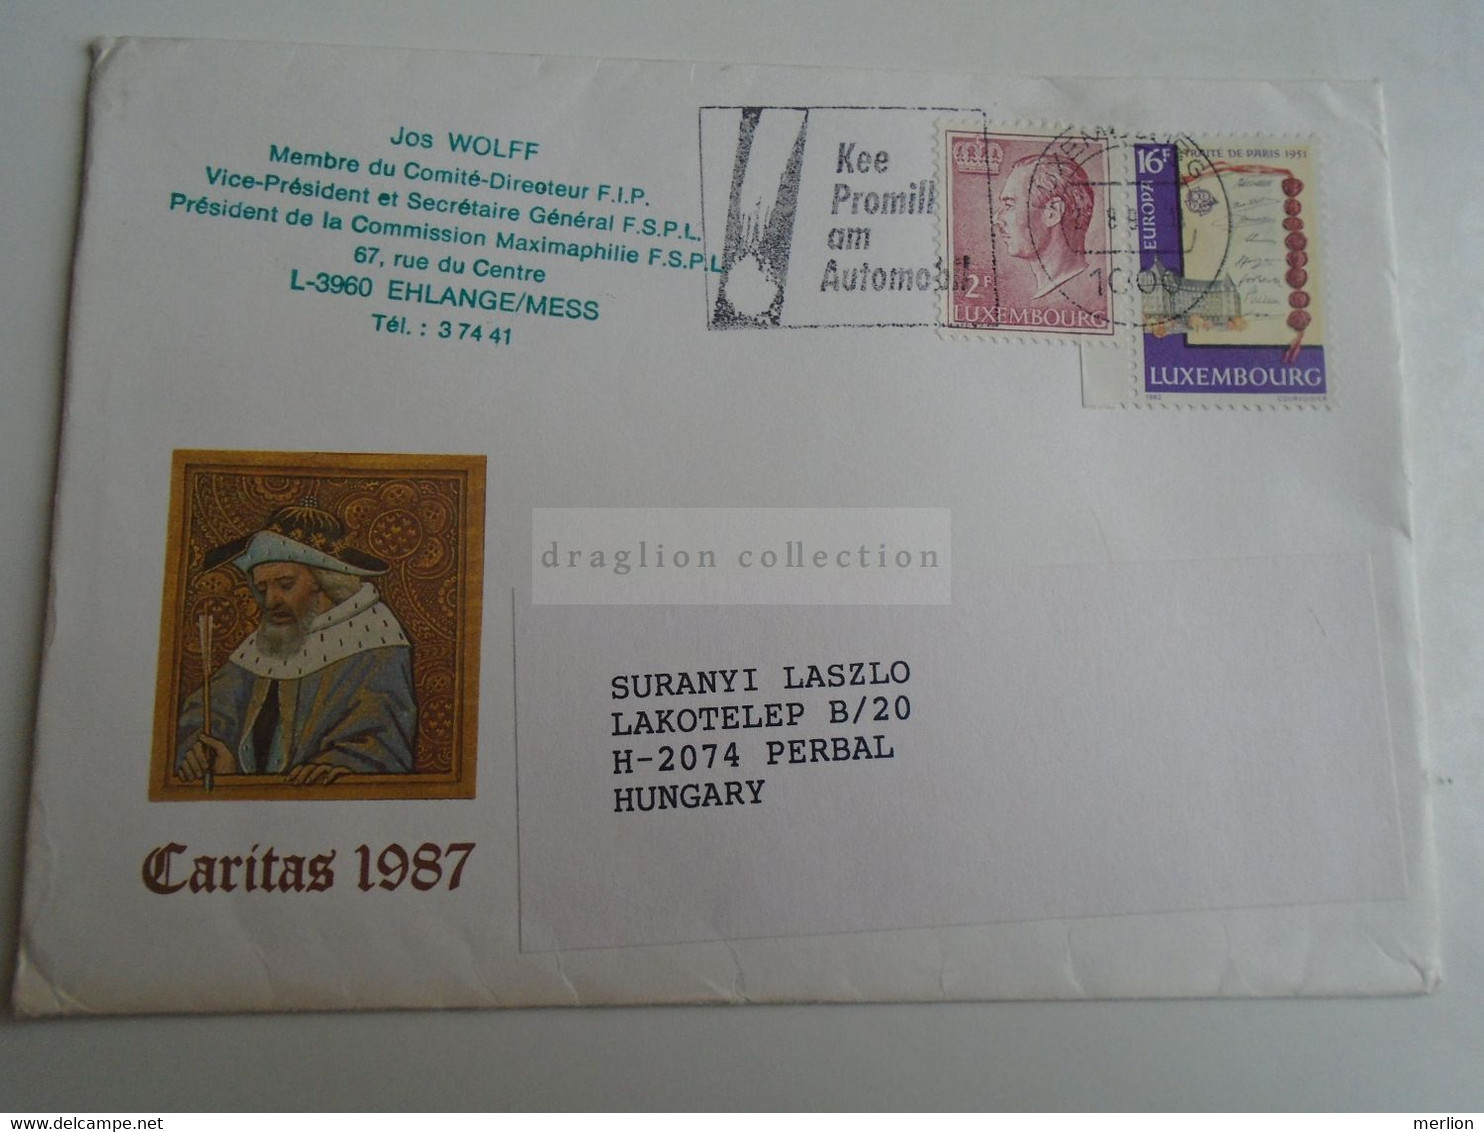 D189815   Luxembourg  Lettre  -Cover  1991  -Caritas 1987 -    Flamme   Kee Promill Am Automobil - Cartas & Documentos